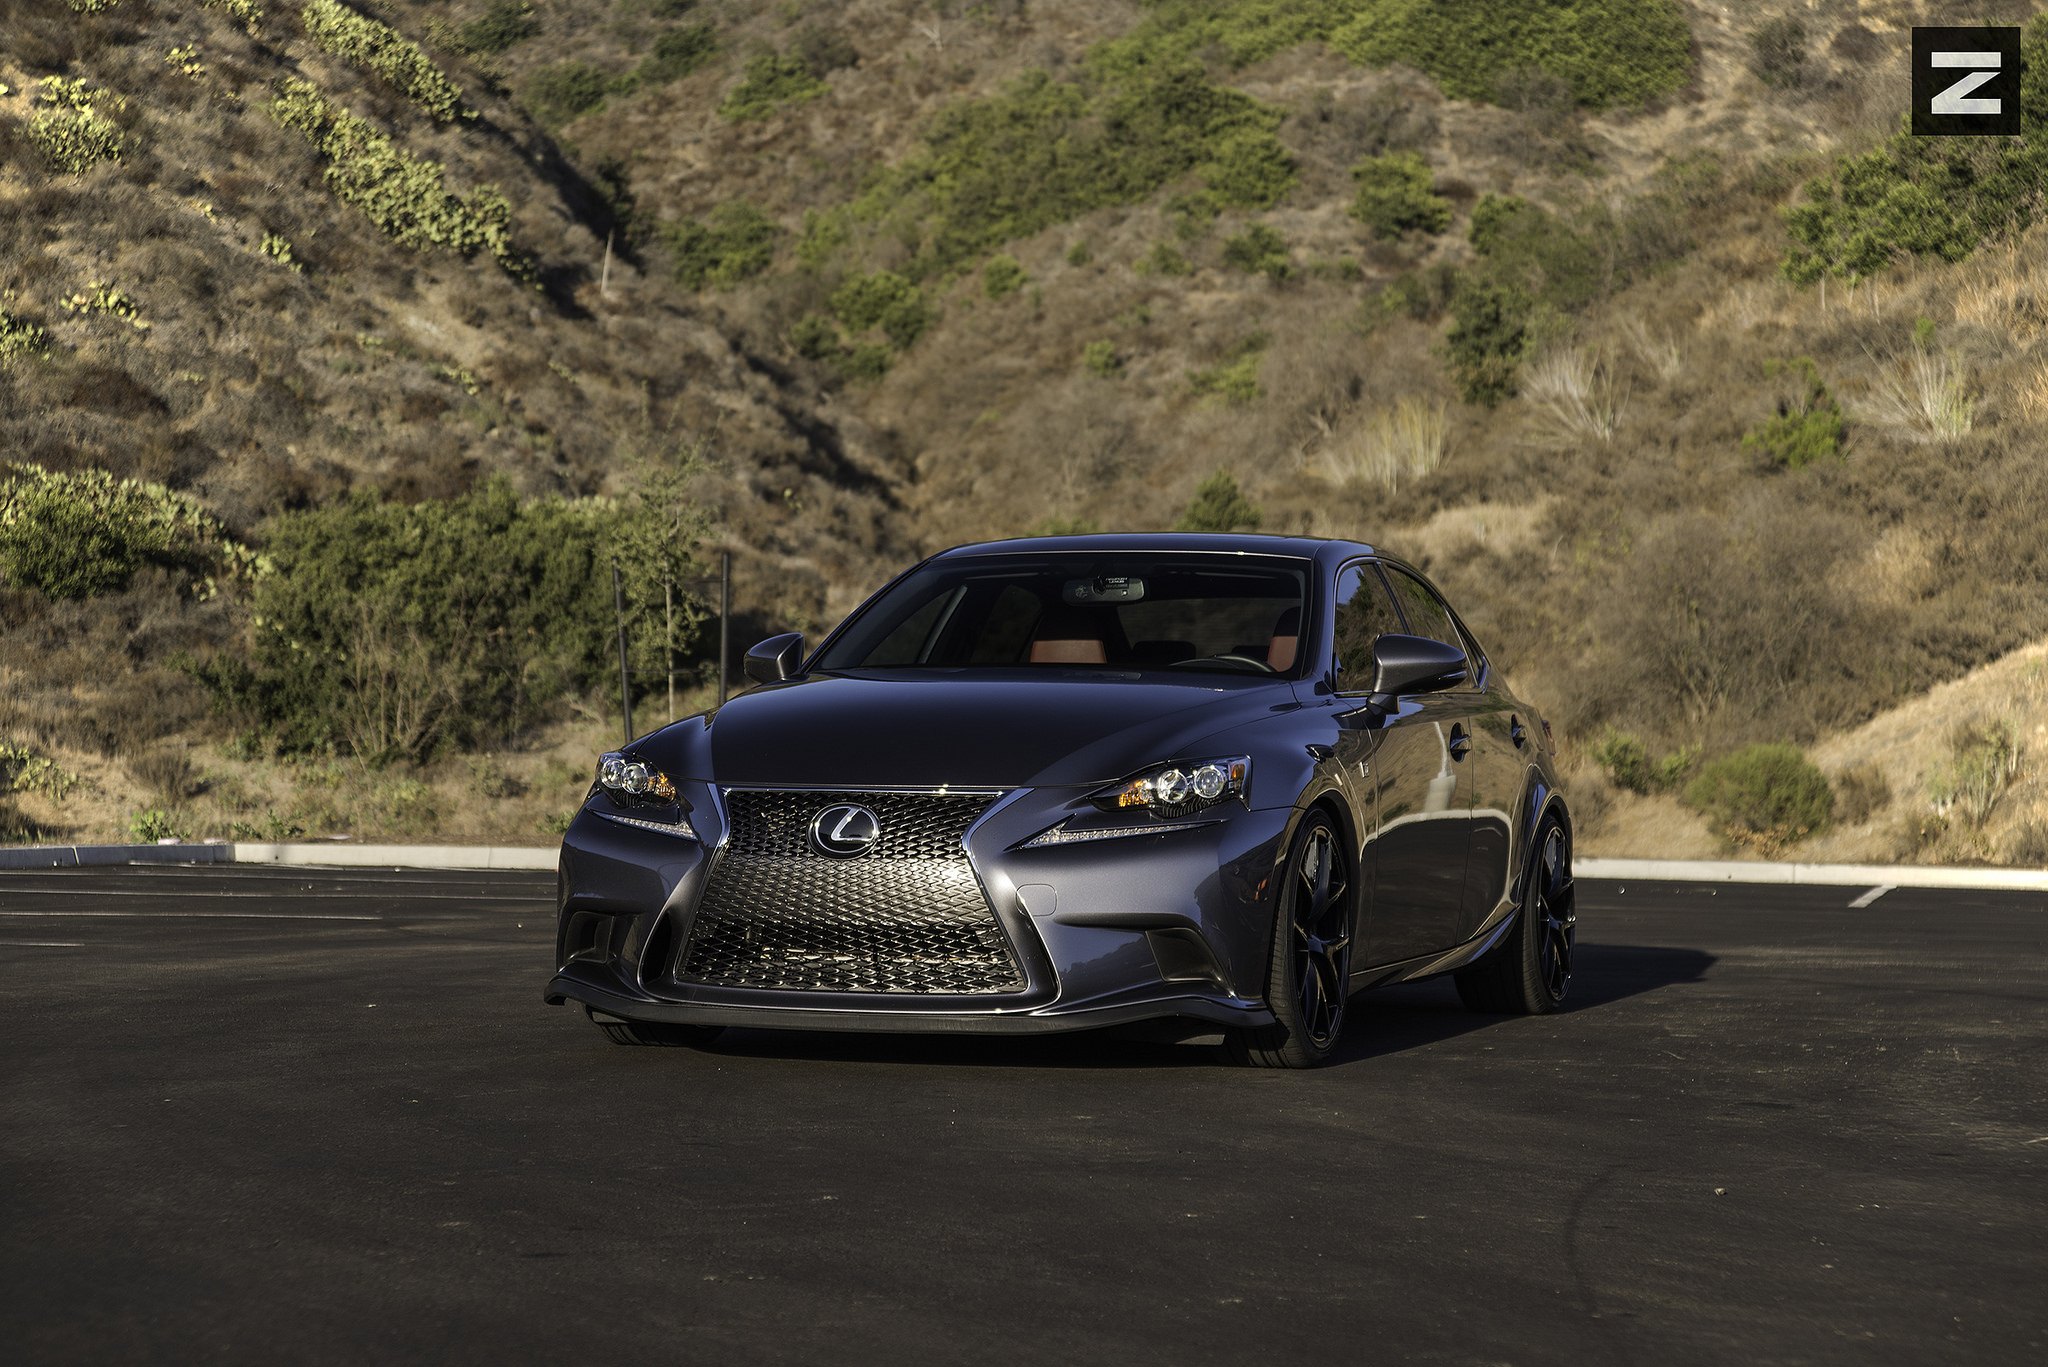 Chrome Mesh Grille on Gray Lexus IS F - Photo by Zito Wheels